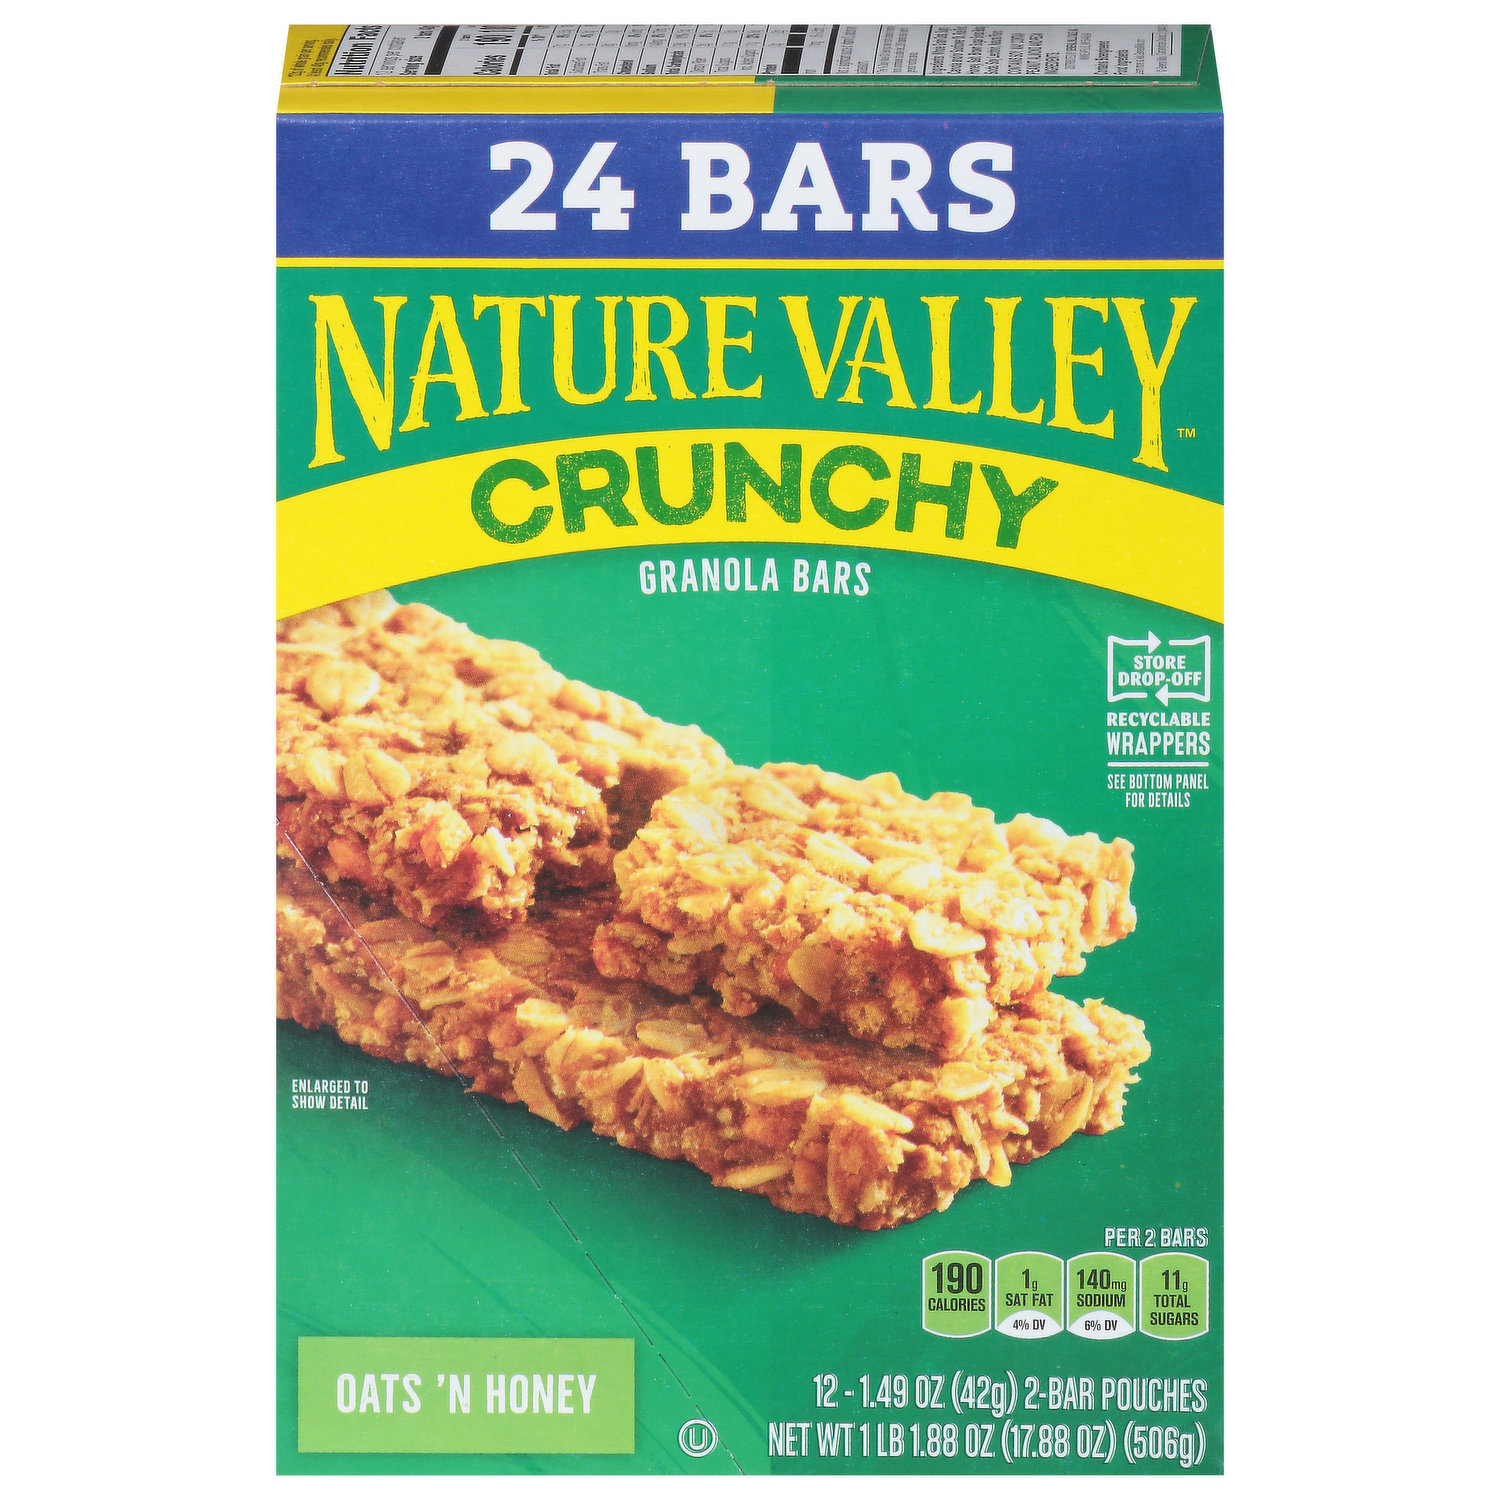 Nature Valley Wafer Bars, Peanut Butter Chocolate, Crispy Creamy